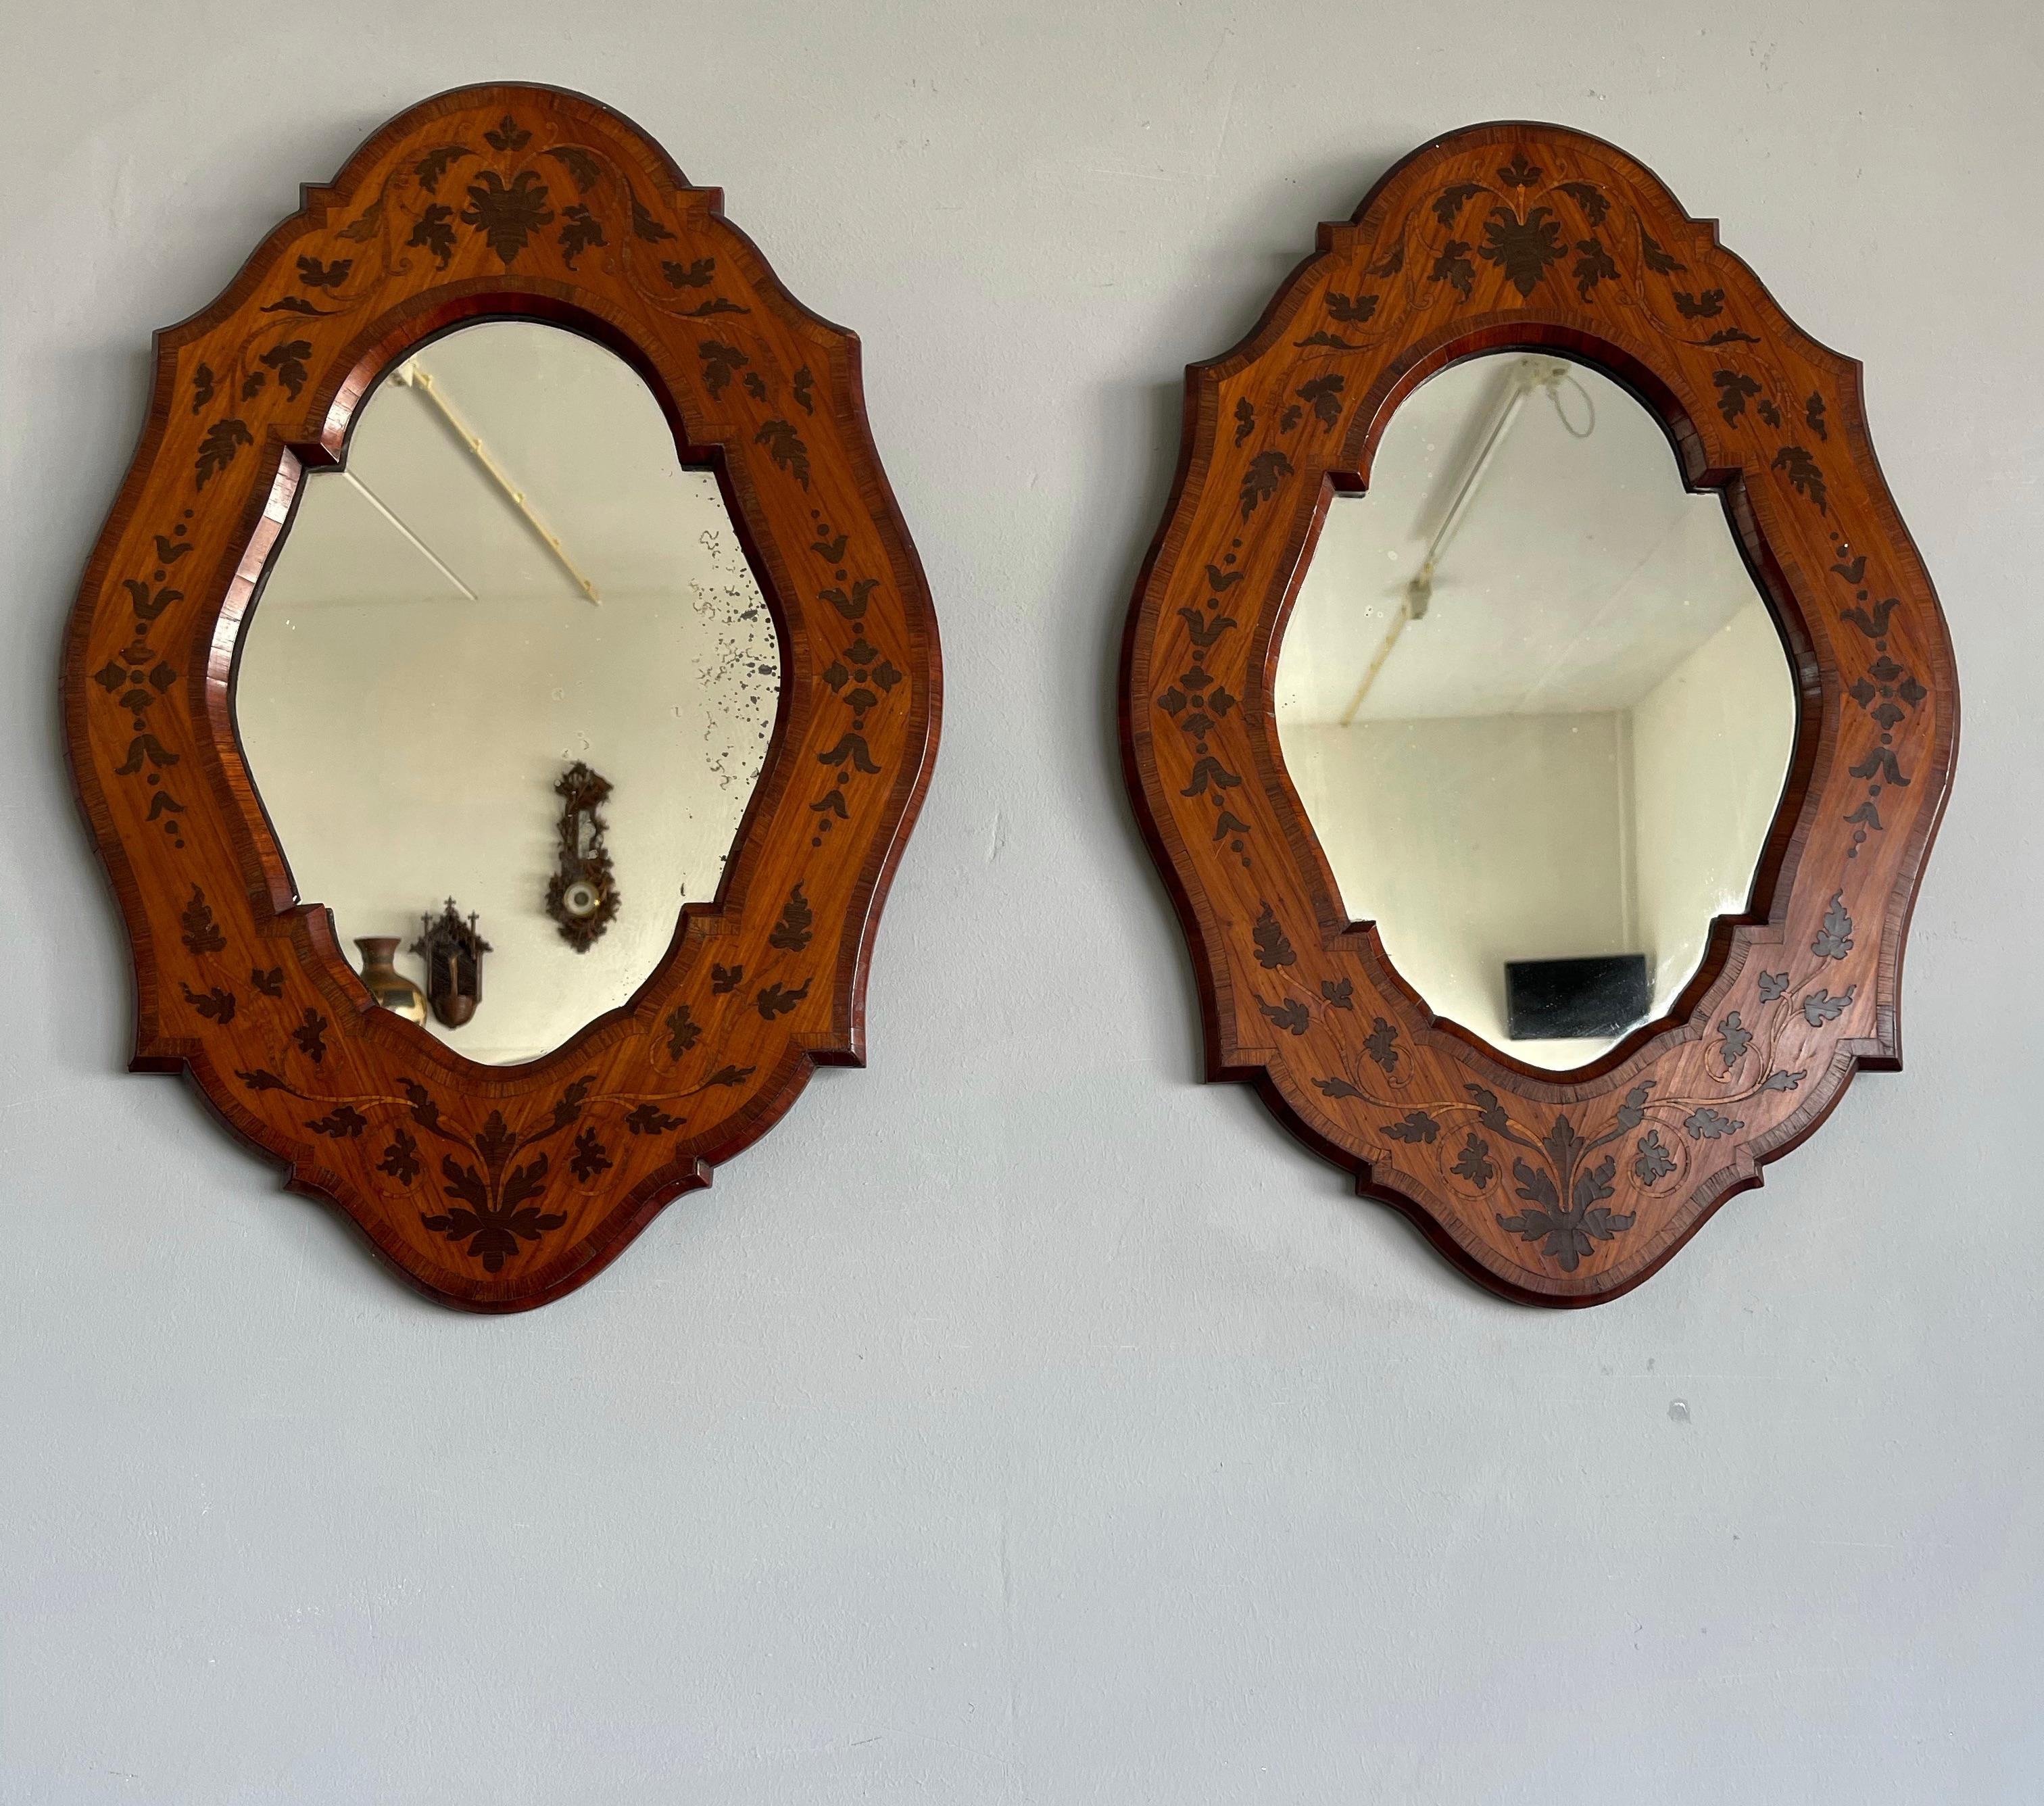 Unique Pair of Italian Wall Mirrors Kingwood Marquetry Inlay Frames, circa 1870 For Sale 11